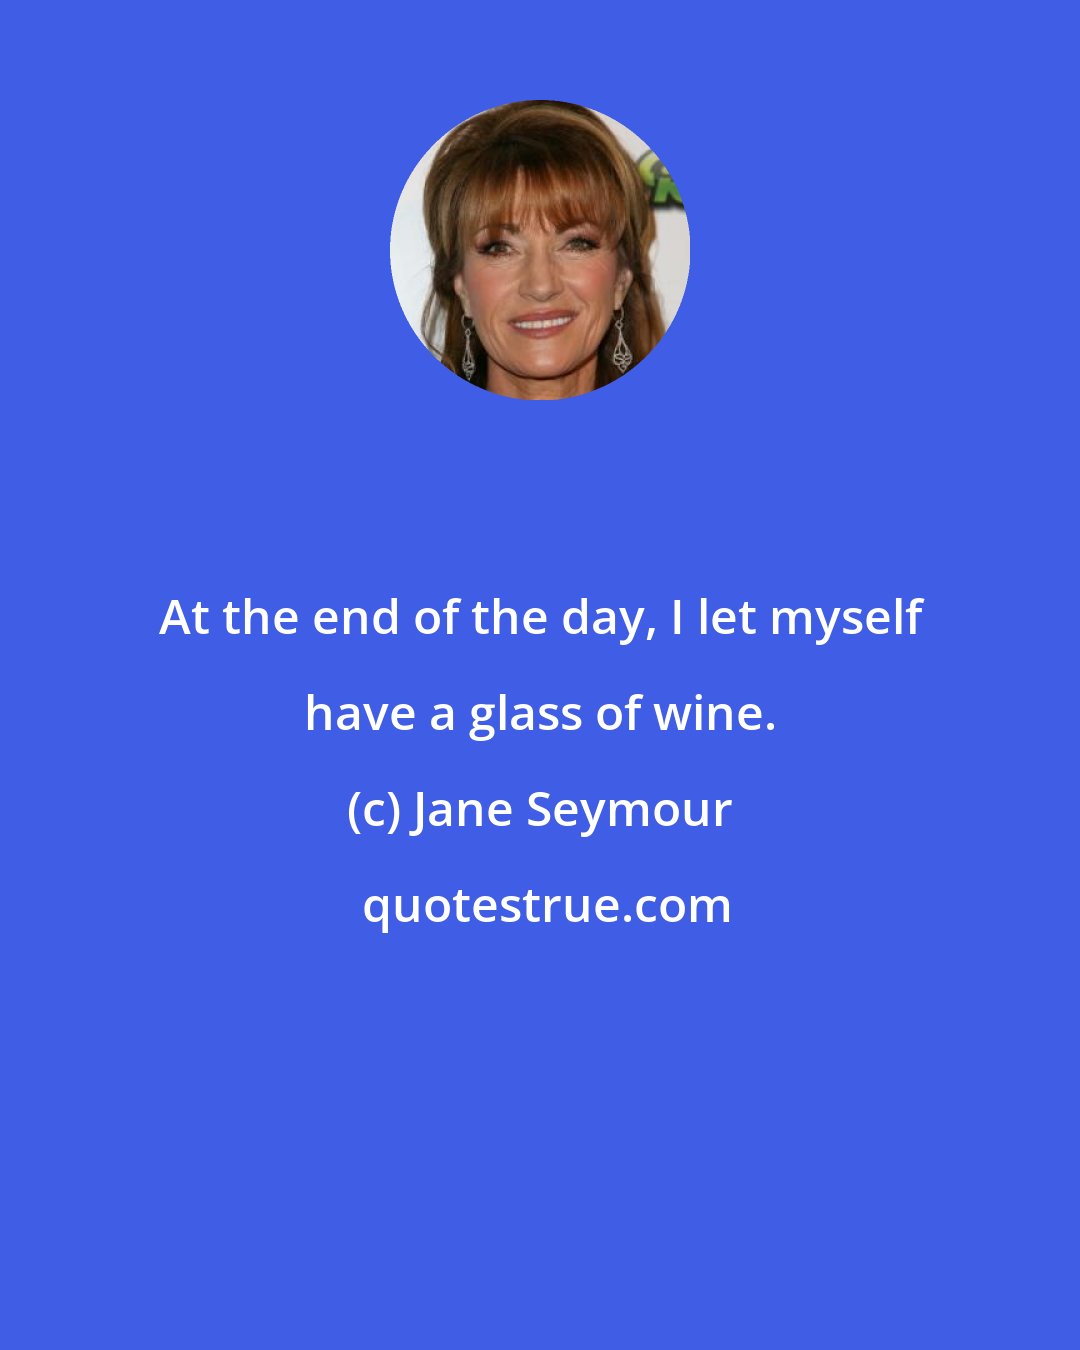 Jane Seymour: At the end of the day, I let myself have a glass of wine.